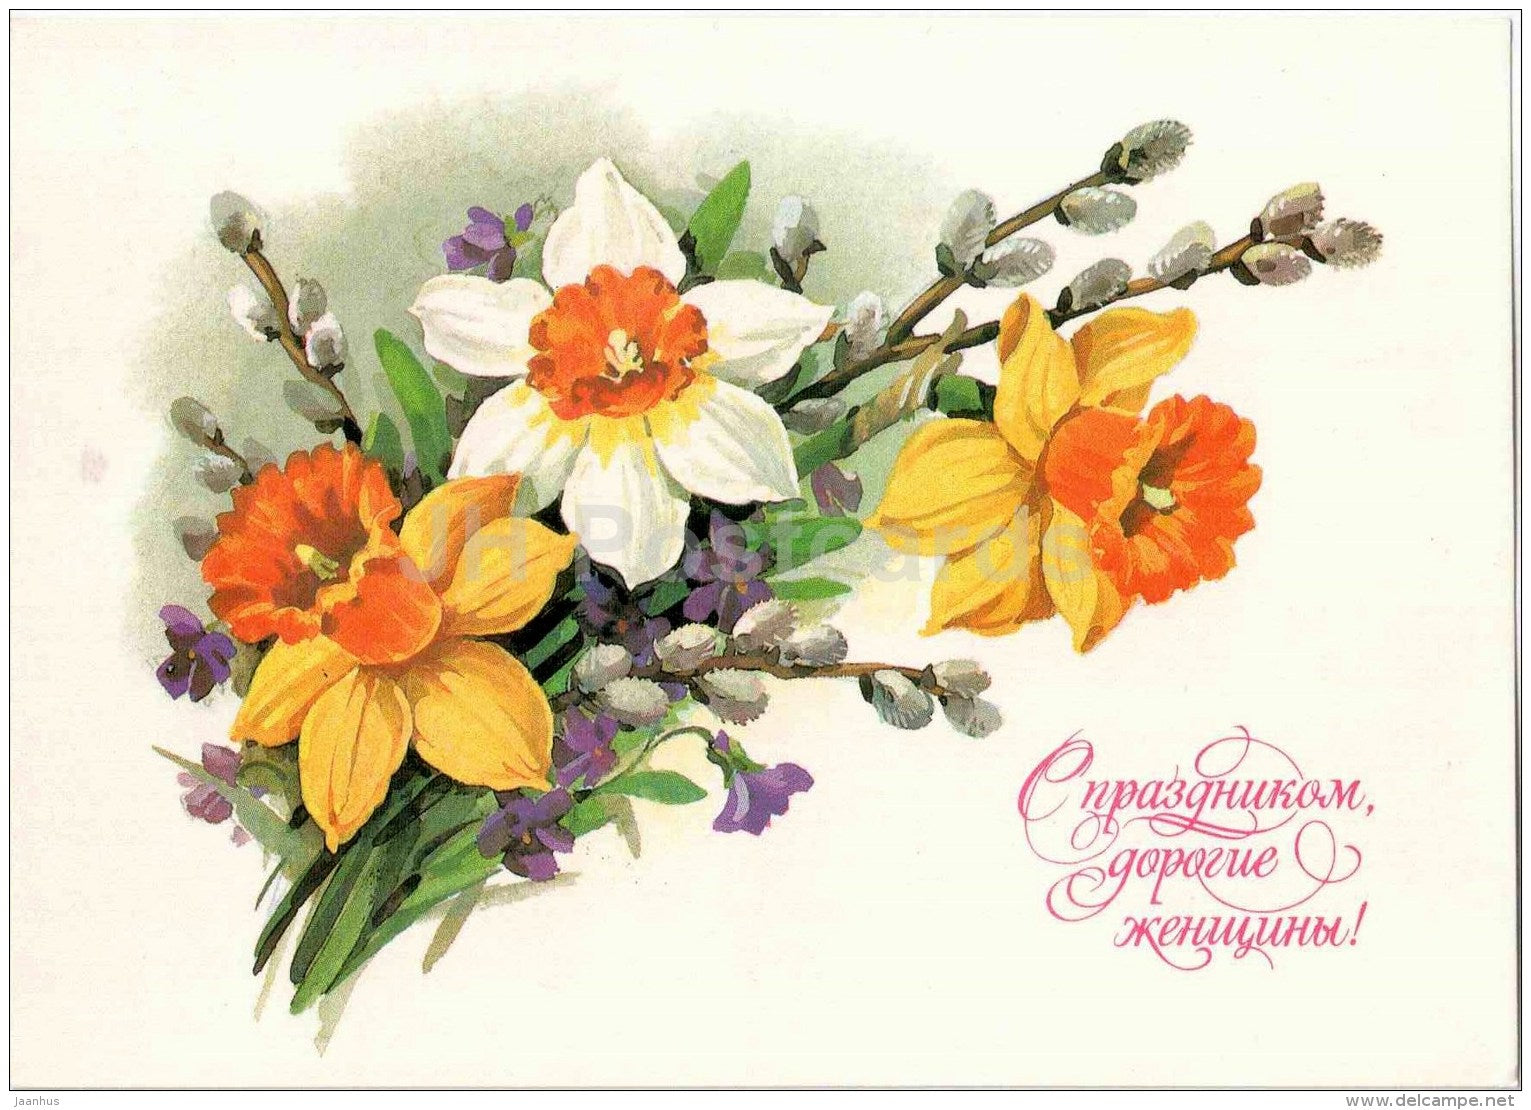 8 March International Women's Day greeting card - narcissus - daffodil - postal stationery - 1985 - Russia USSR - unused - JH Postcards